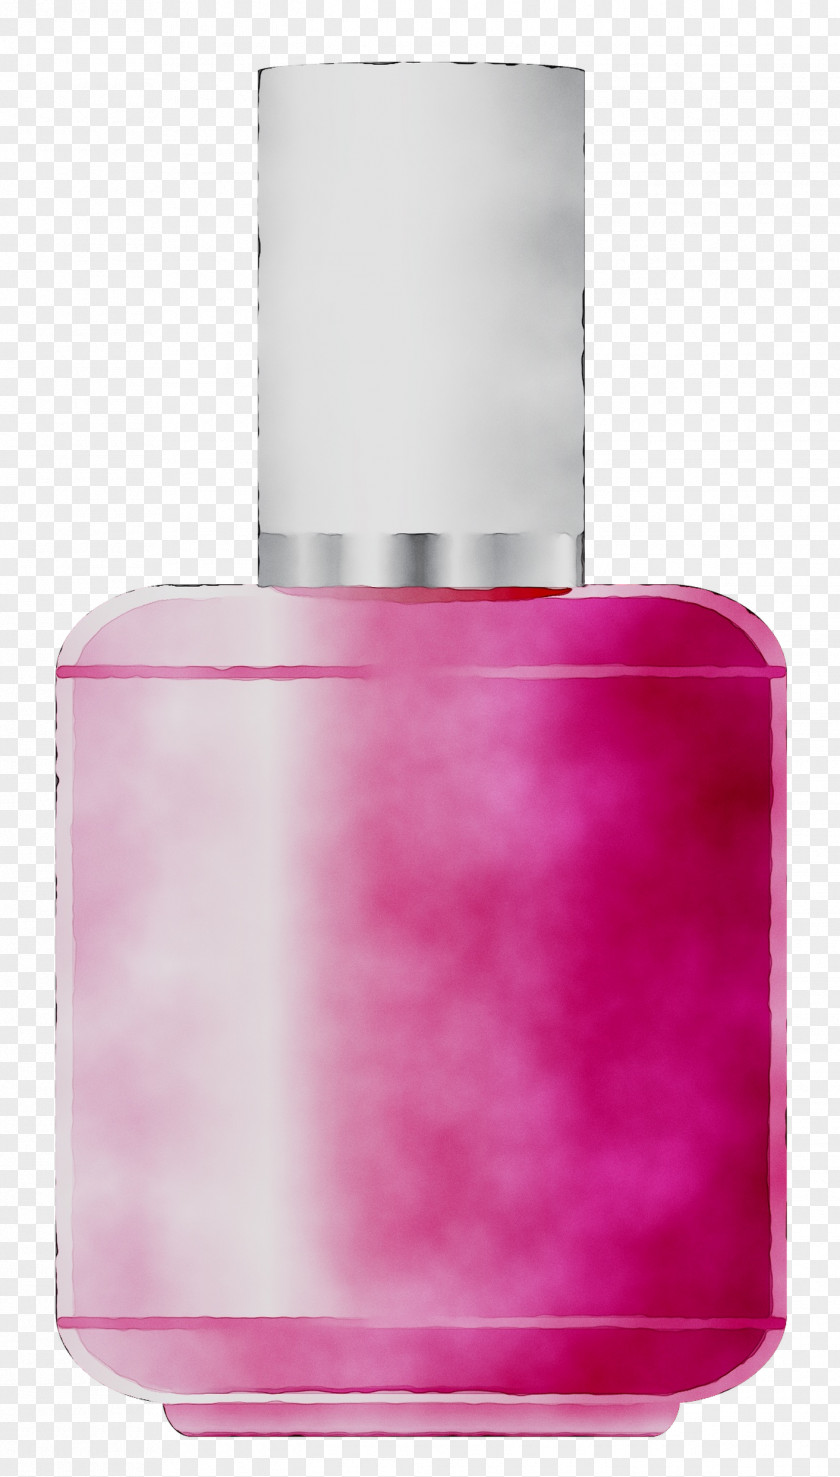 Perfume Glass Bottle Product Design PNG